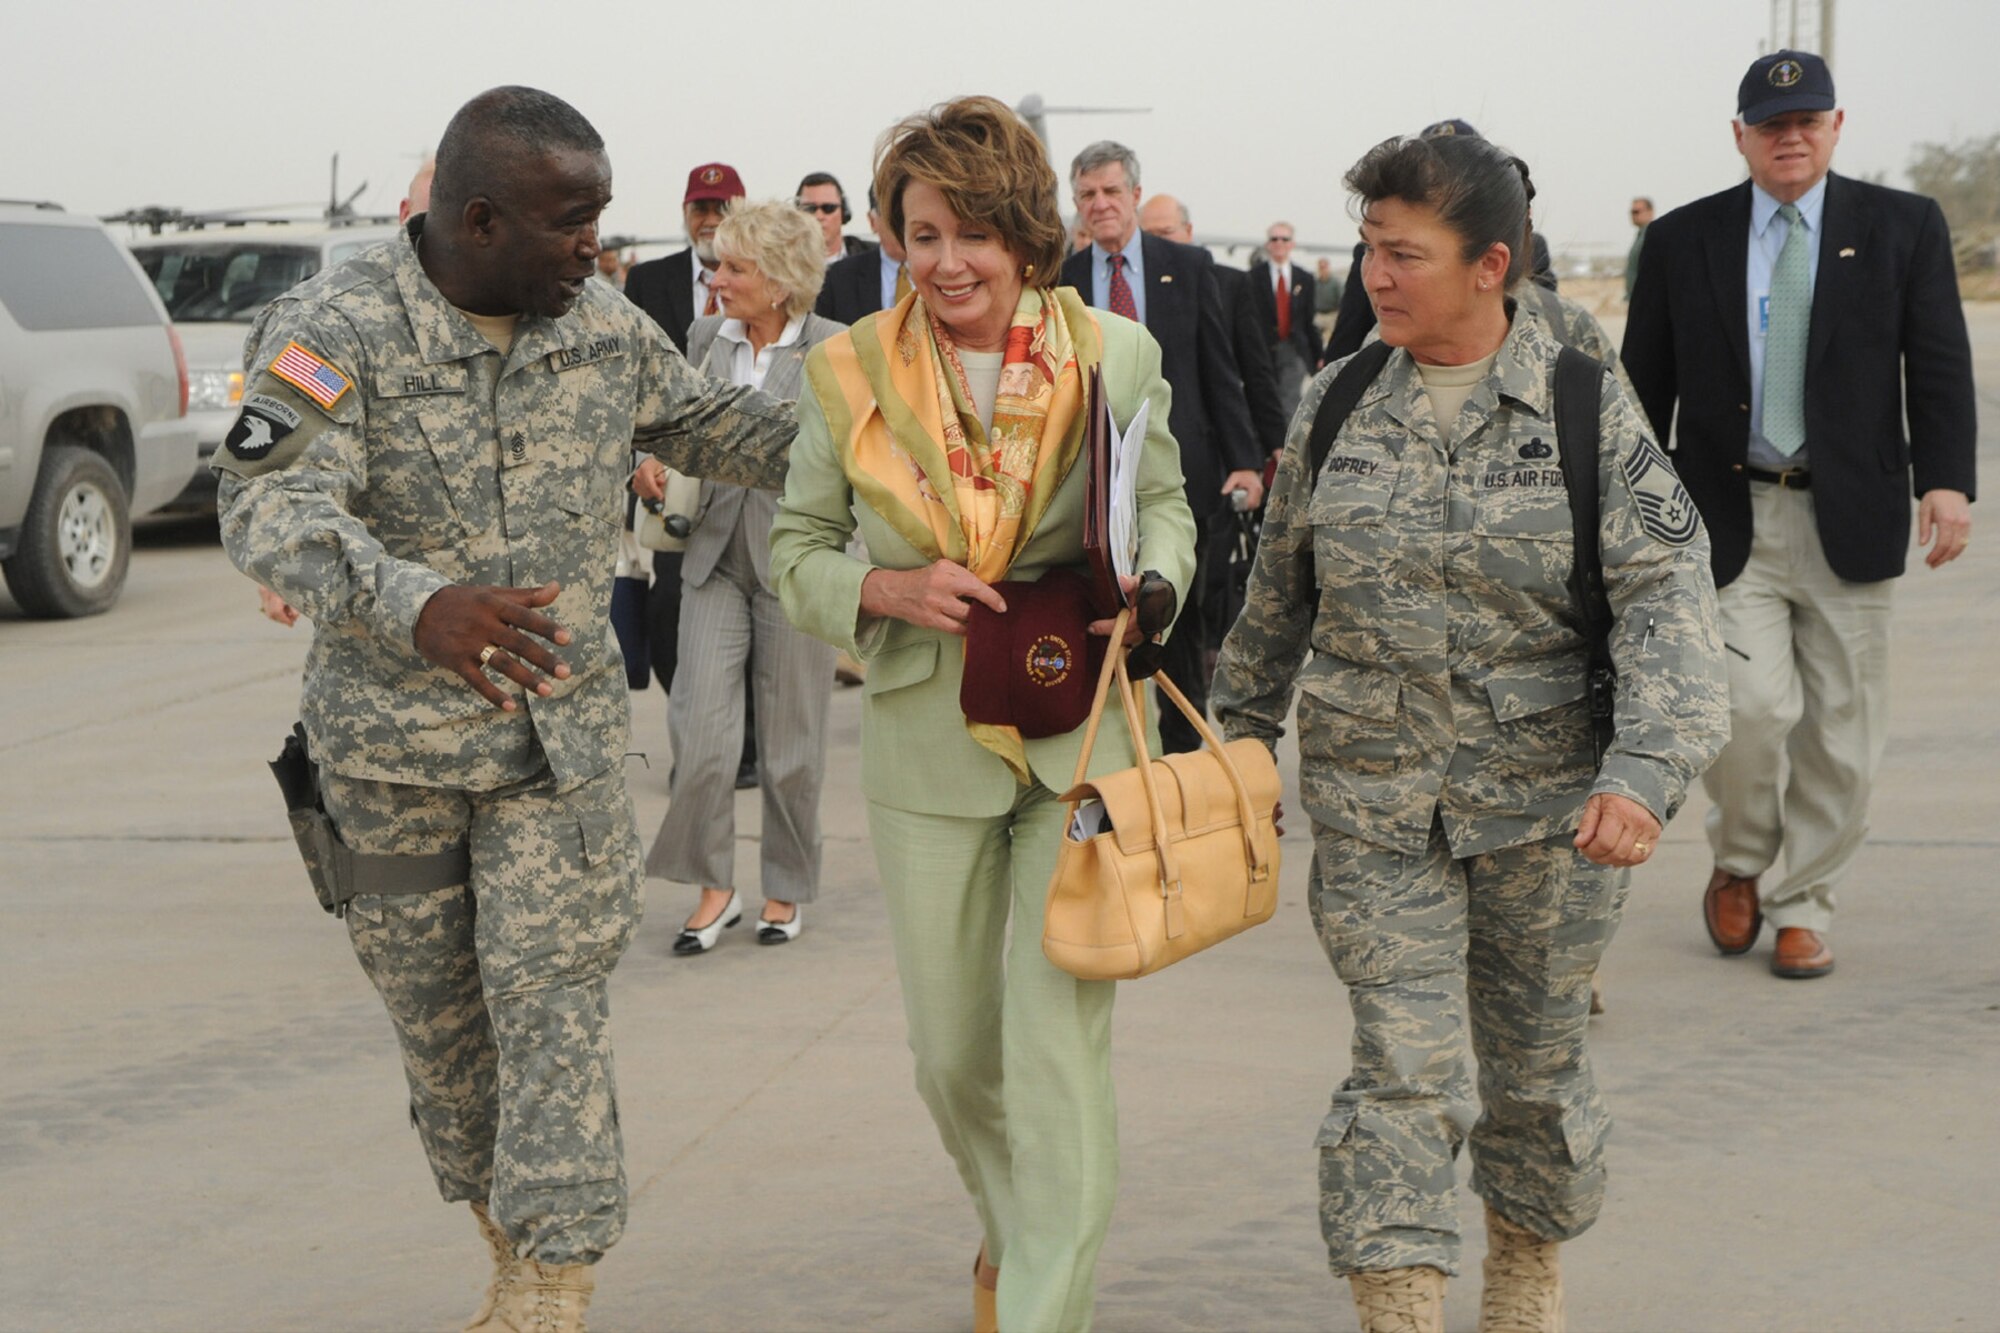 SATHER AIR BASE, Iraq -- Command Sgt. Maj. Marvin Hill, command sergeant major, Multi-National Force - Iraq (left), and Chief Master Sgt. Kathryn Godfrey, 447th Air Expeditionary Group superintendent, walk with Speaker of the House, Nancy Pelosi, on her way to visit with Airmen and Soldiers here May 17. Ms. Pelosi and seven other members of the U.S. House of Representatives visited Sather AB, adjacent to Baghdad International Airport. (U.S. Air Force photo/Tech. Sgt. Amanda Callahan)